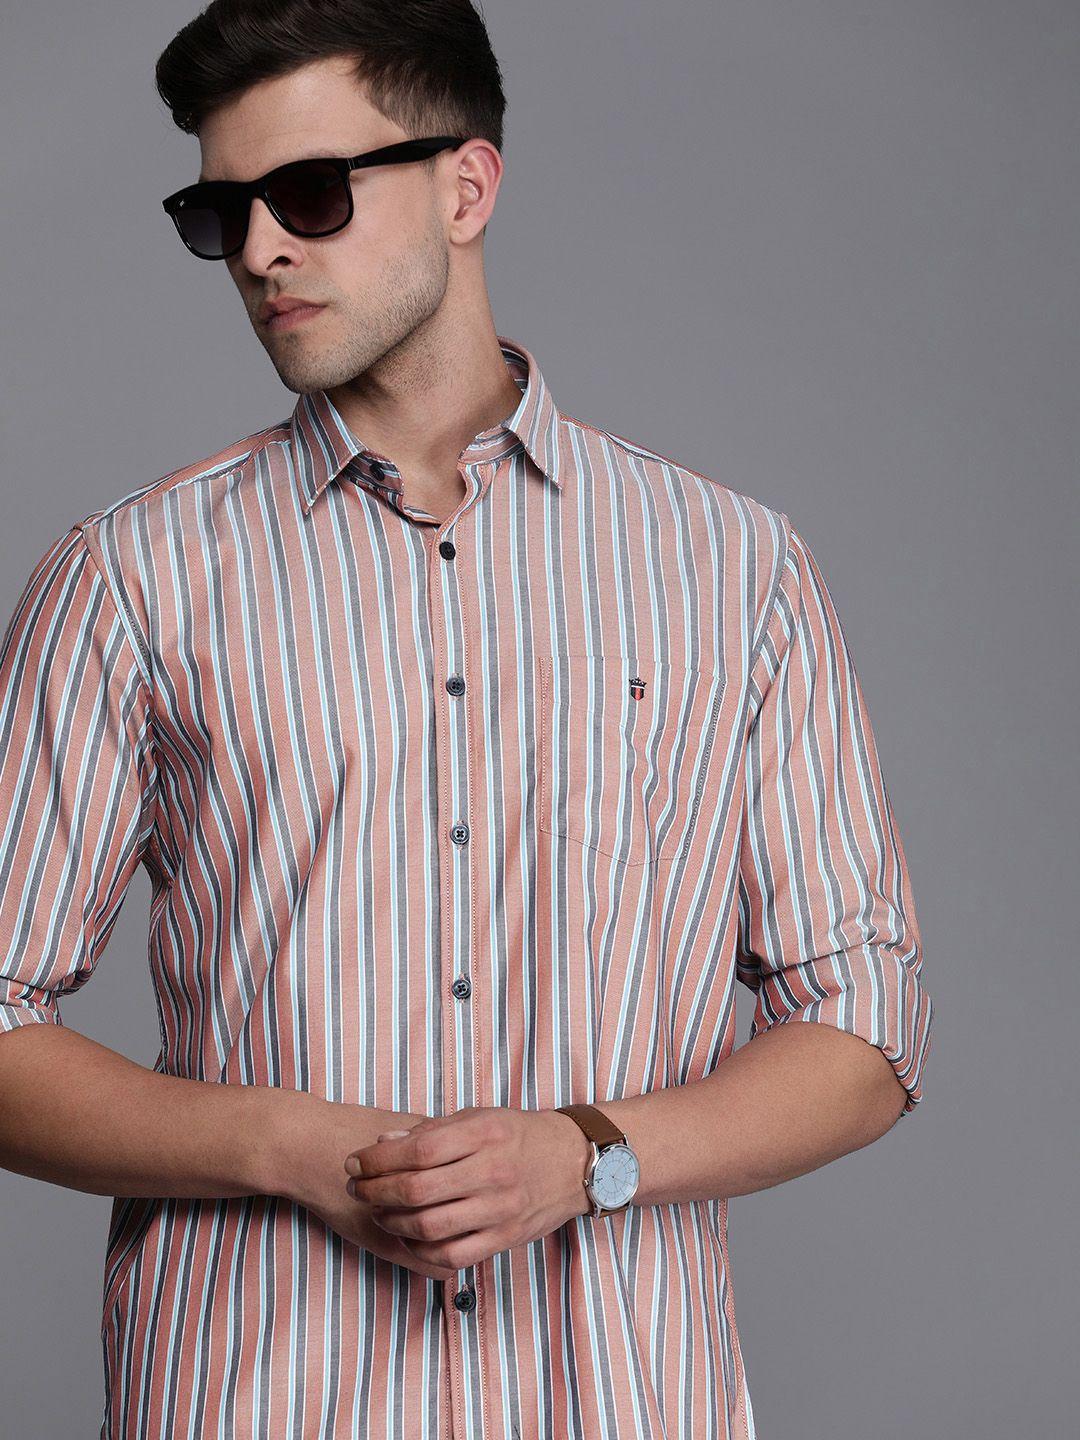 louis philippe sport pure cotton slim fit opaque striped casual shirt